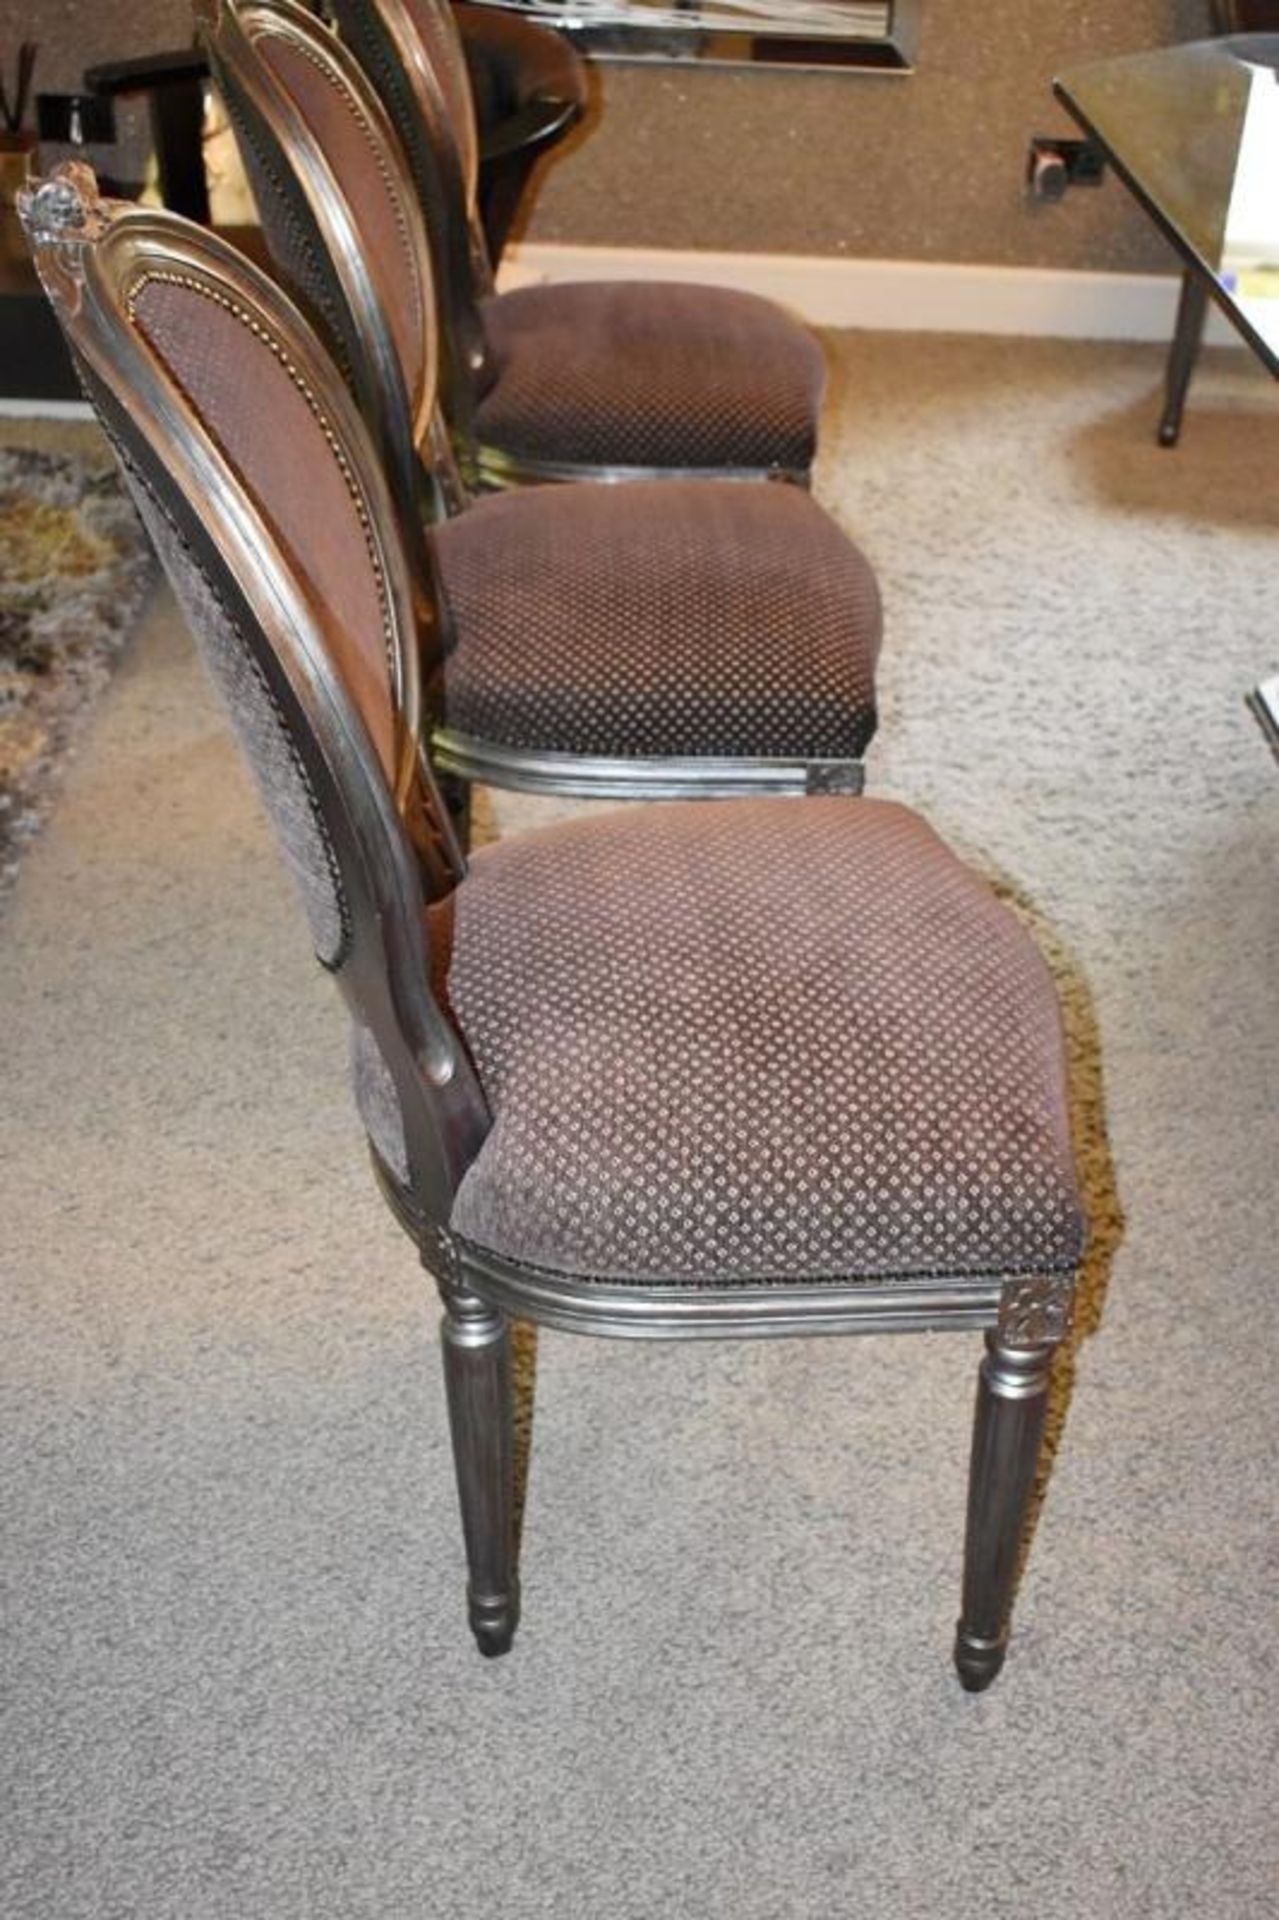 1 x Grand Glass Table With Baroque Legs And Chairs Set - CL407 - Location Bowdon WA14 - Image 7 of 21